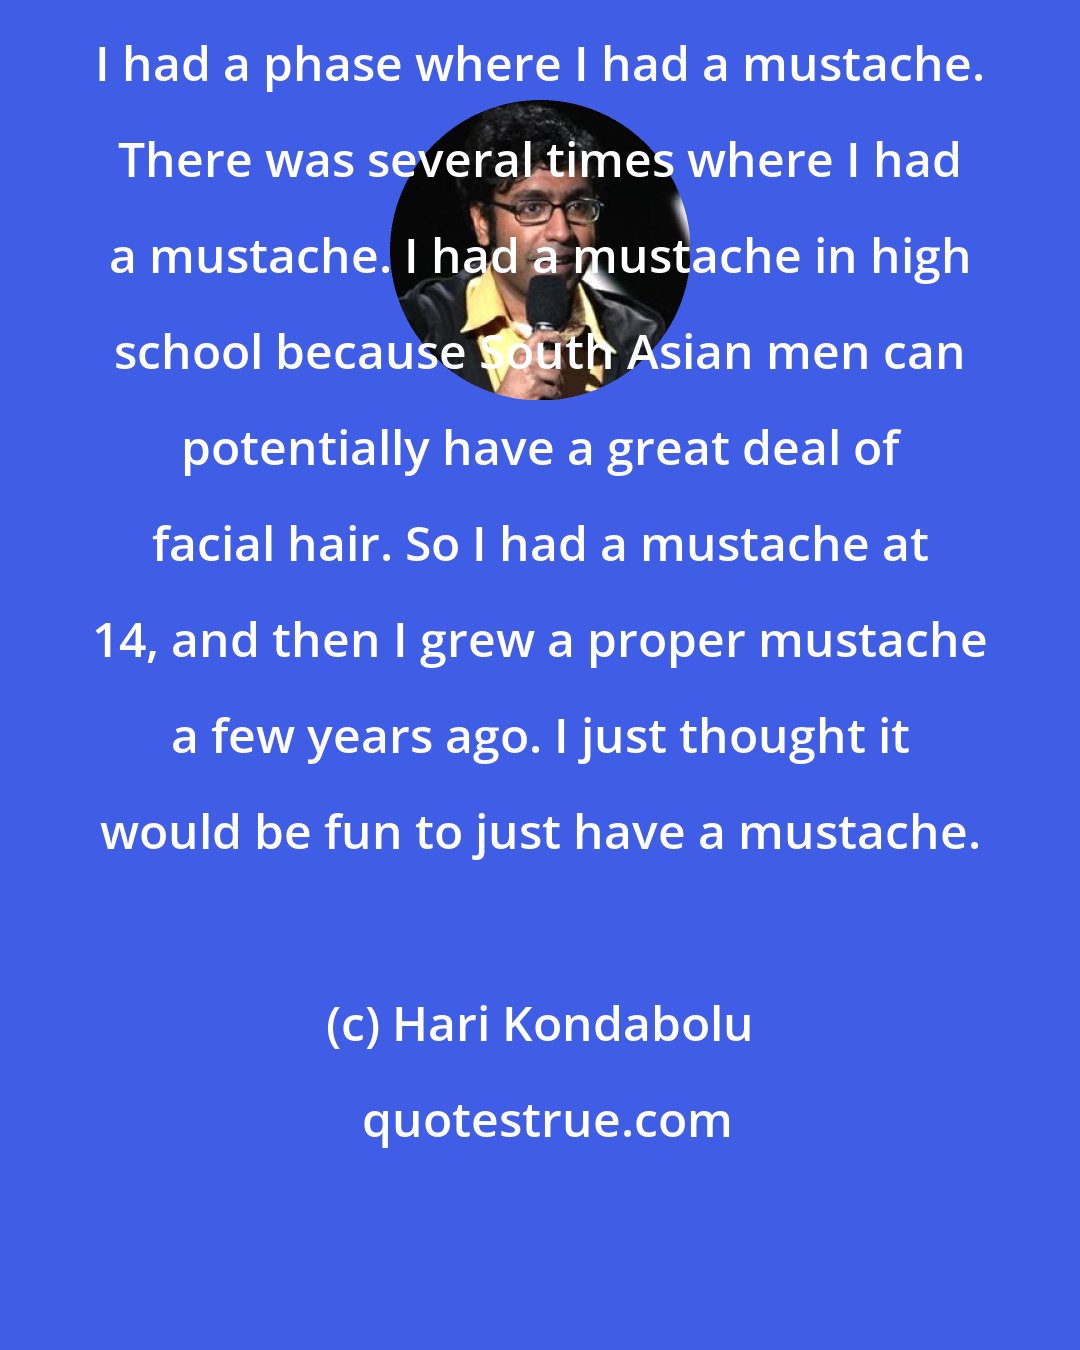 Hari Kondabolu: I had a phase where I had a mustache. There was several times where I had a mustache. I had a mustache in high school because South Asian men can potentially have a great deal of facial hair. So I had a mustache at 14, and then I grew a proper mustache a few years ago. I just thought it would be fun to just have a mustache.